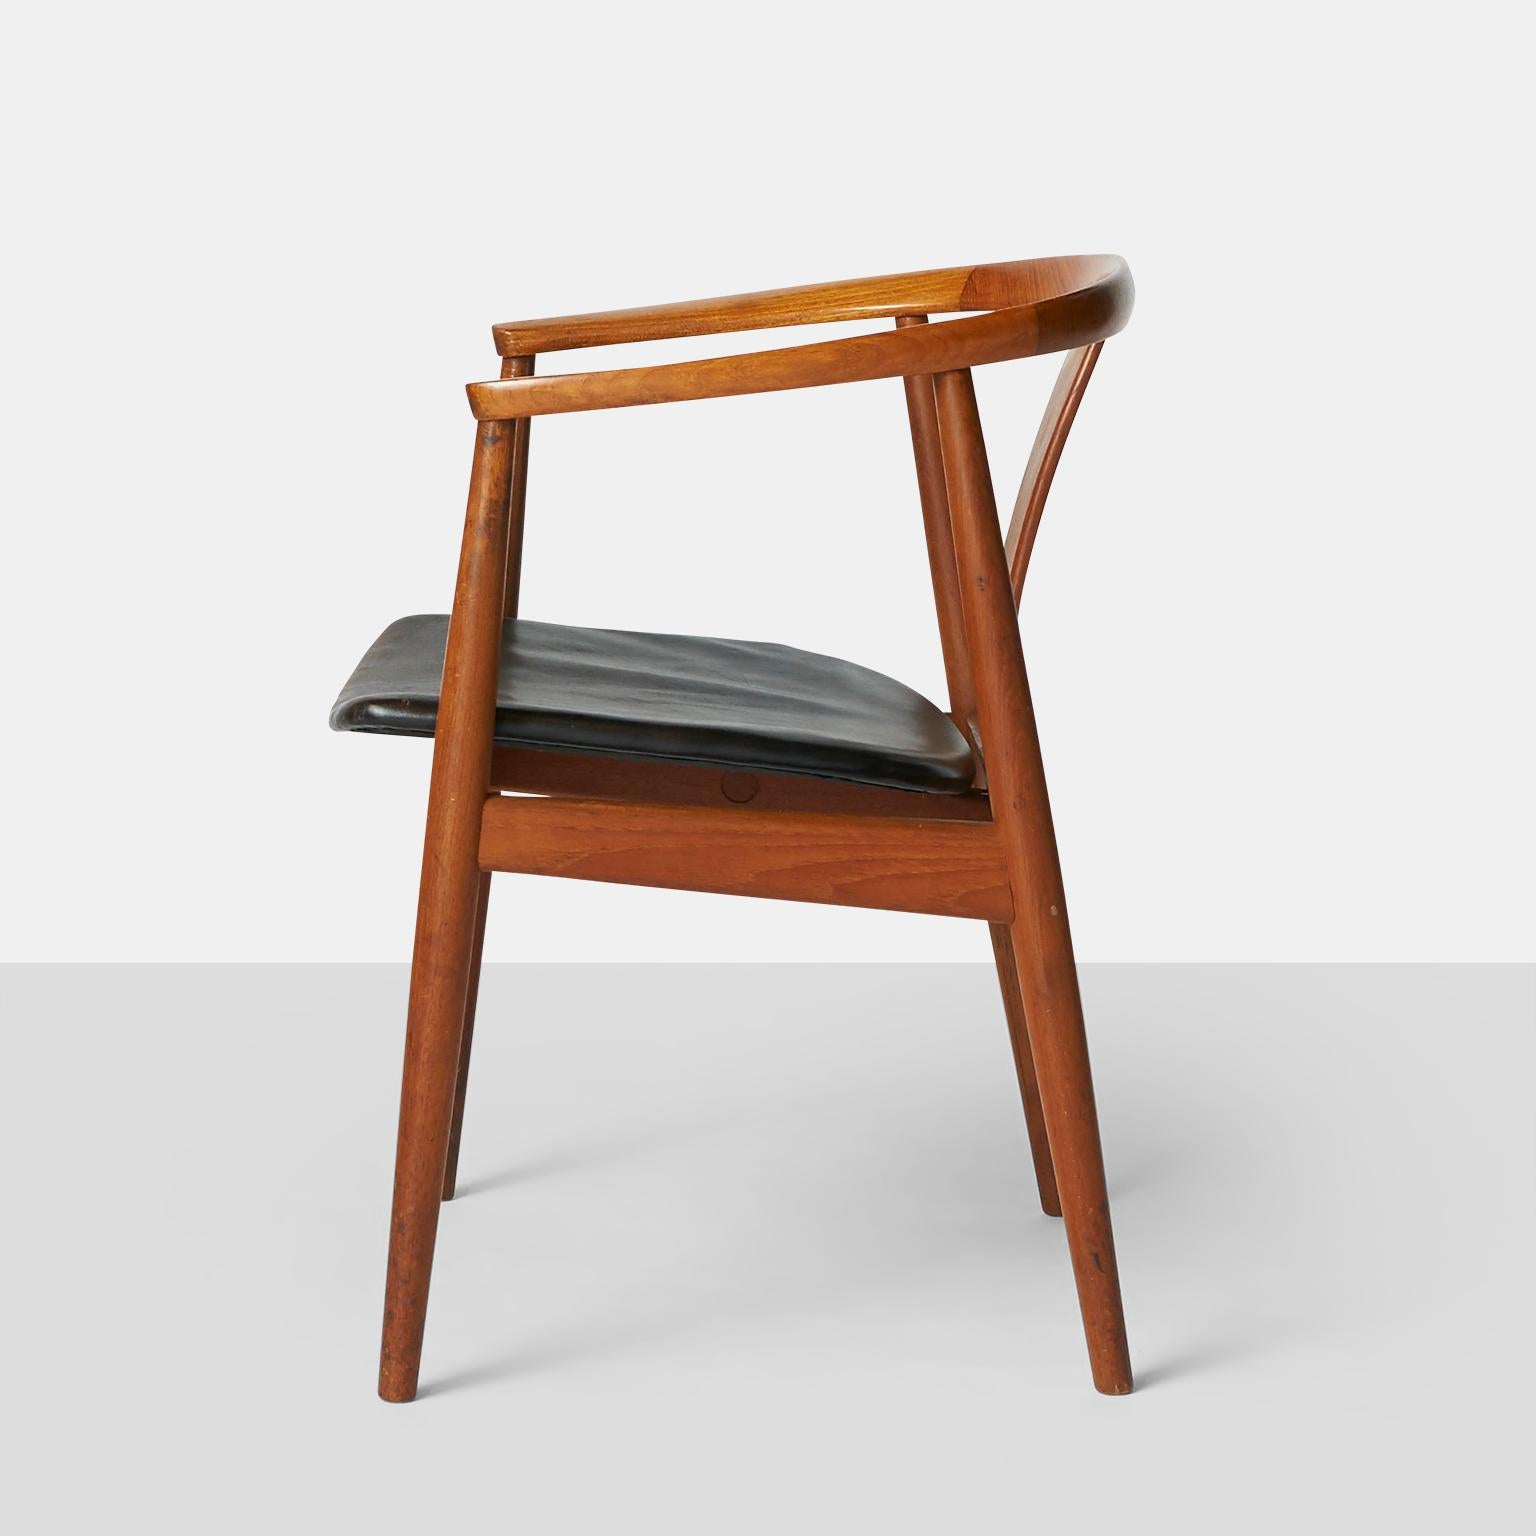 Mid-20th Century Teak & Leather Chair by Tove and Edvard Kindt-Larsen For Sale